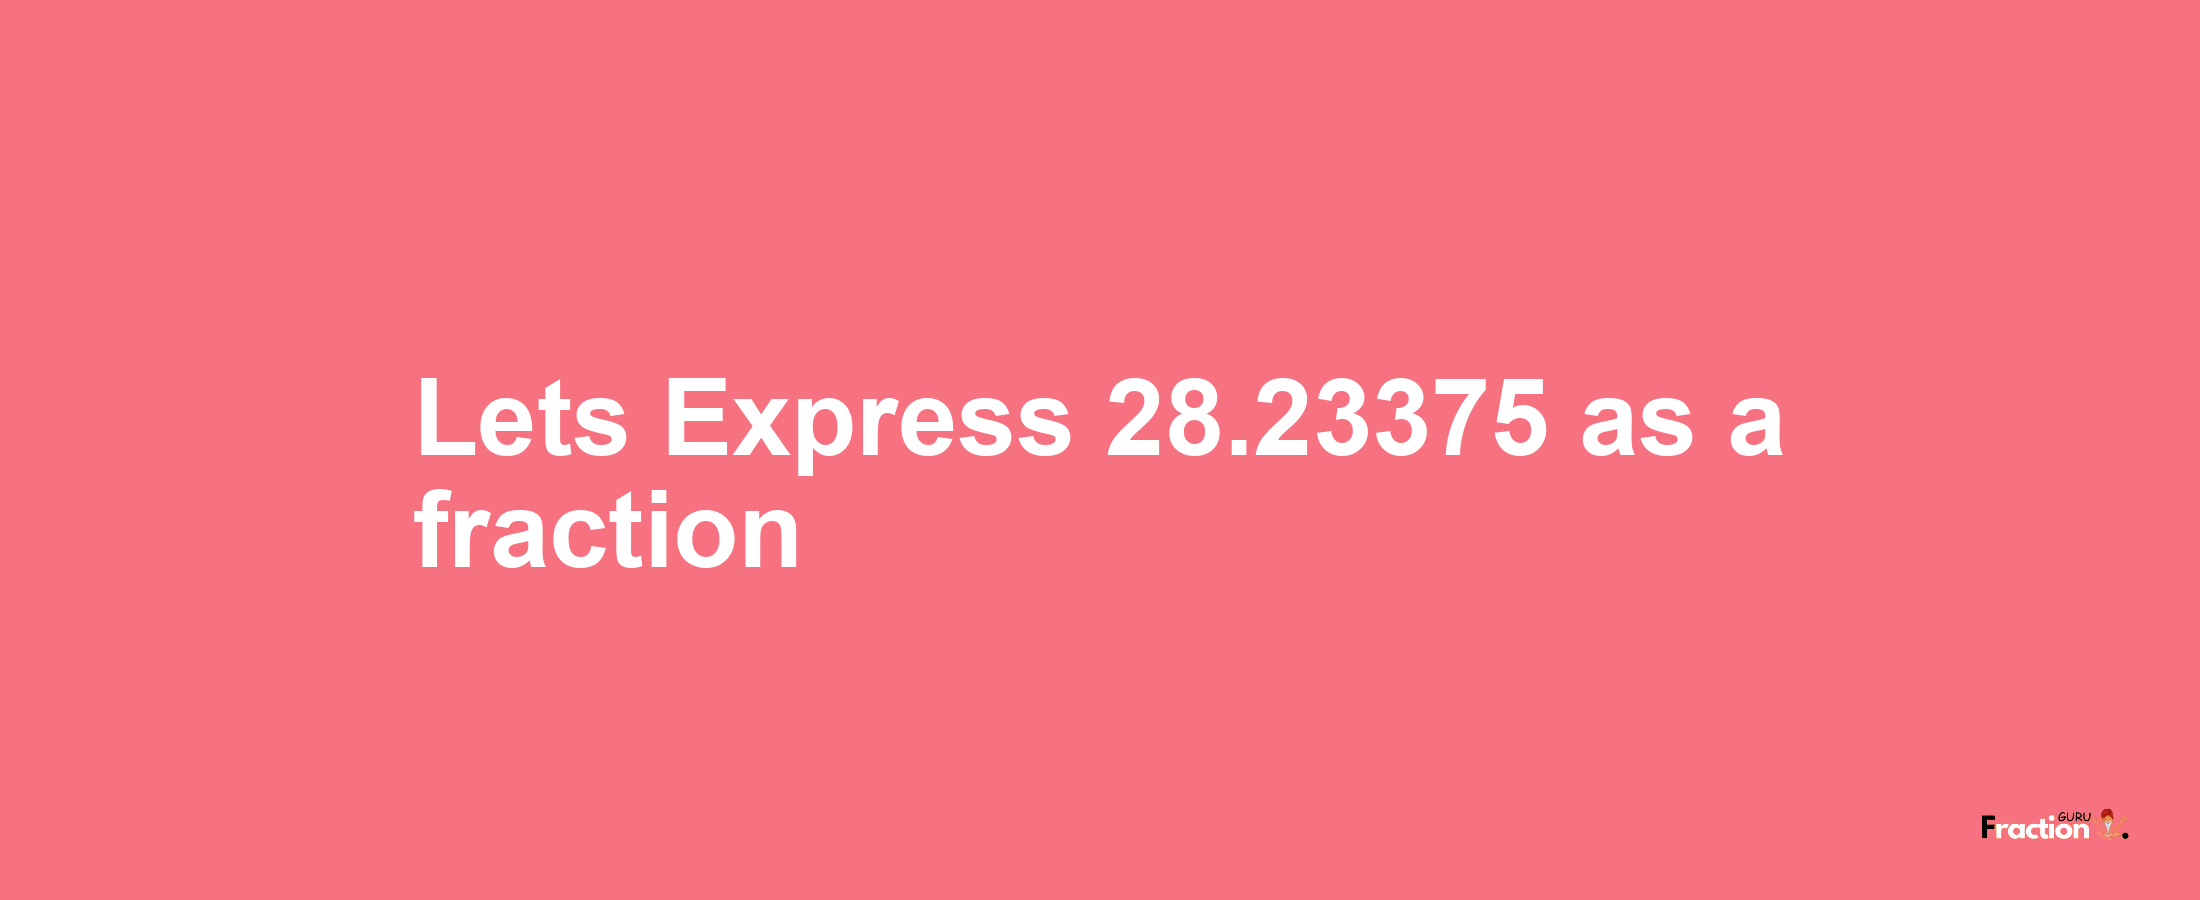 Lets Express 28.23375 as afraction